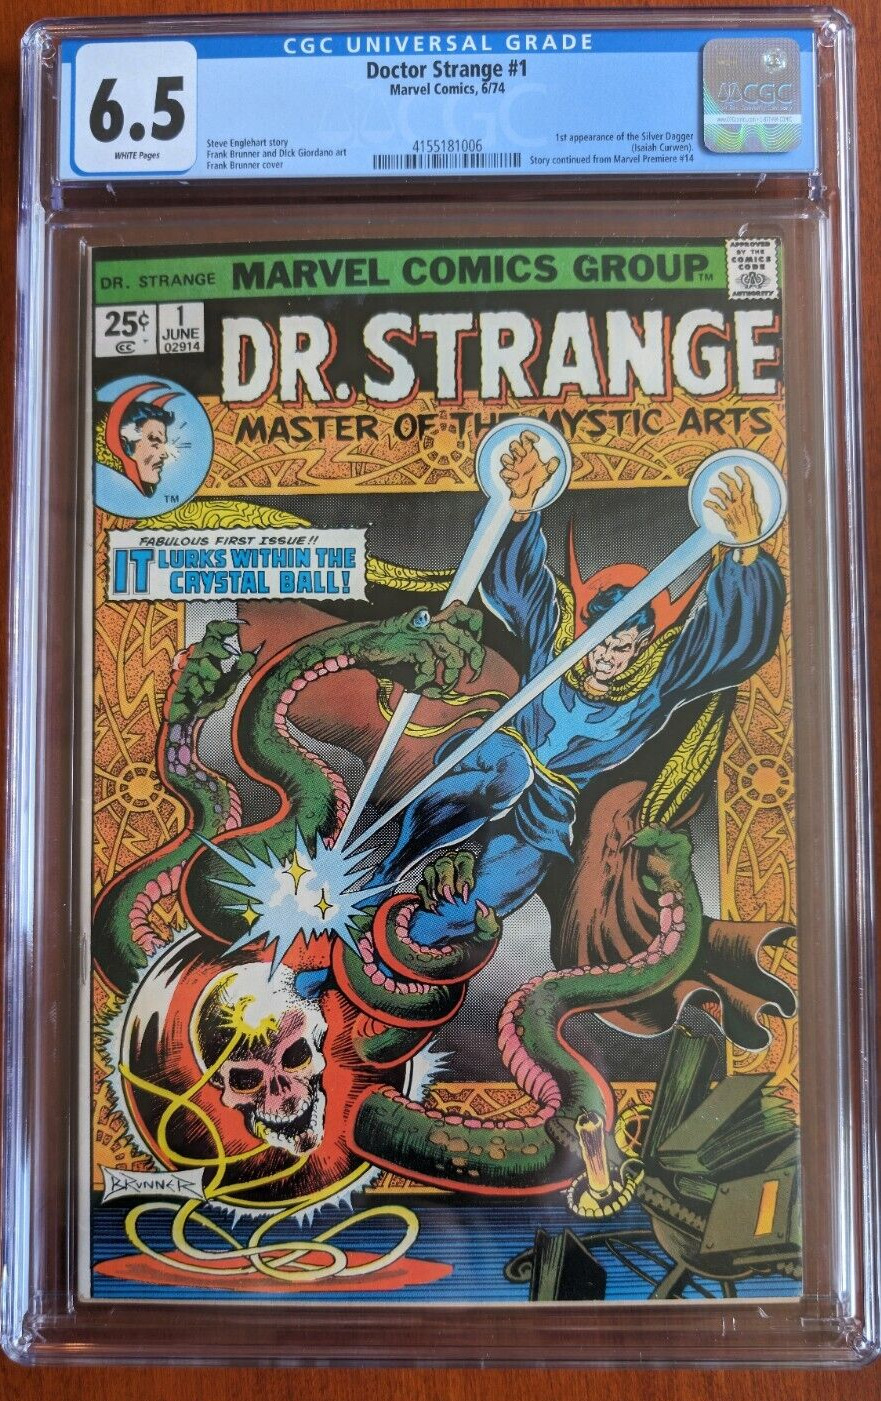 Doctor Strange #1 (1974, Marvel) CGC 6.5 - First appearance of Silver Dagger